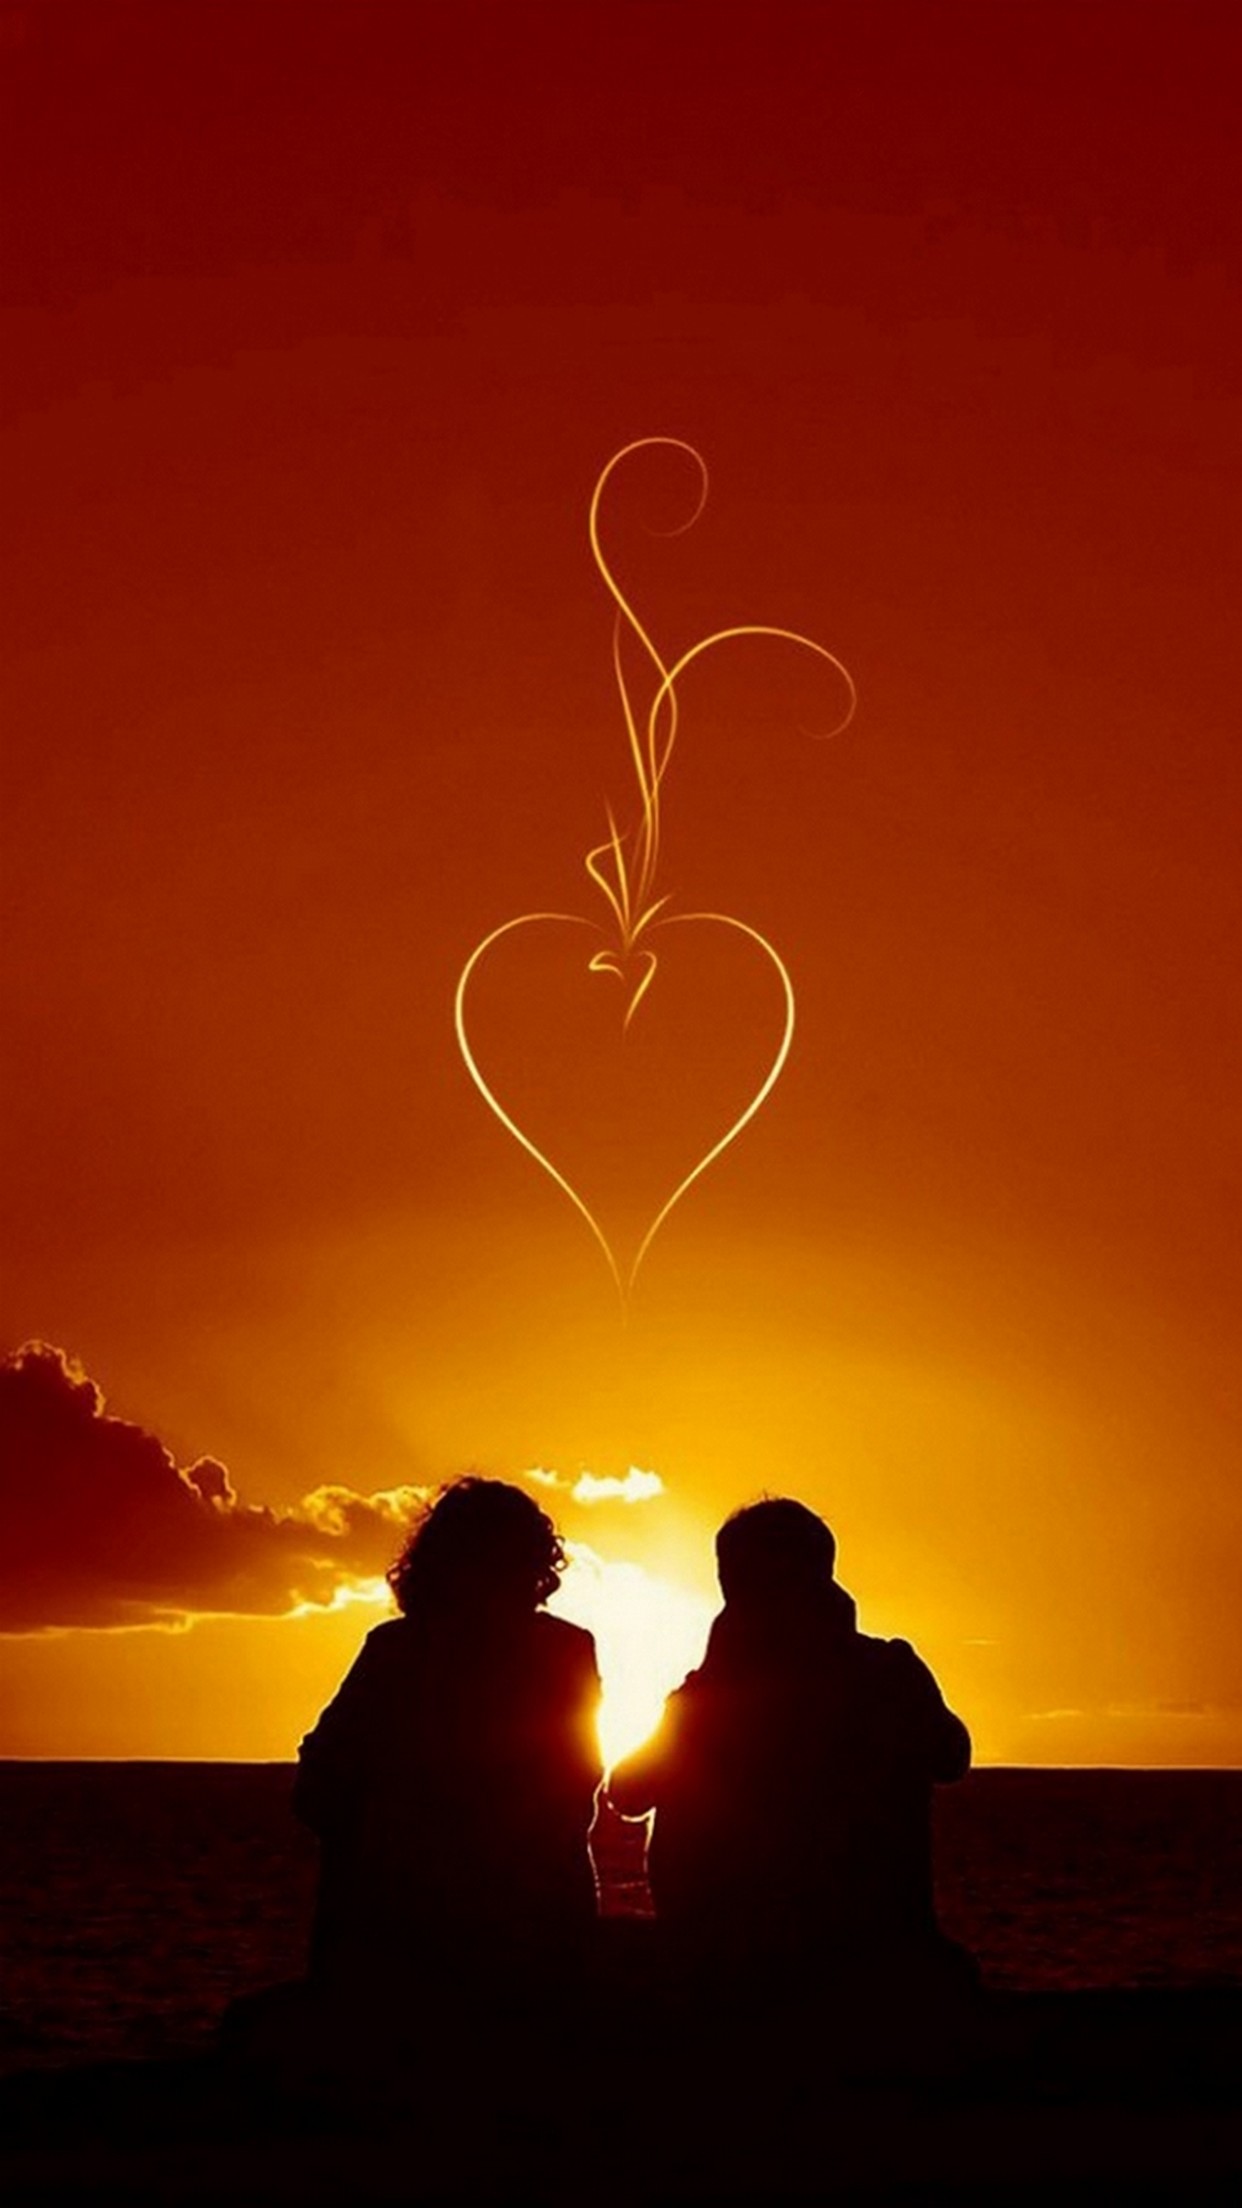 2560x1440, Love Wallpapers - Romantic Photo High Resolution , HD Wallpaper & Backgrounds